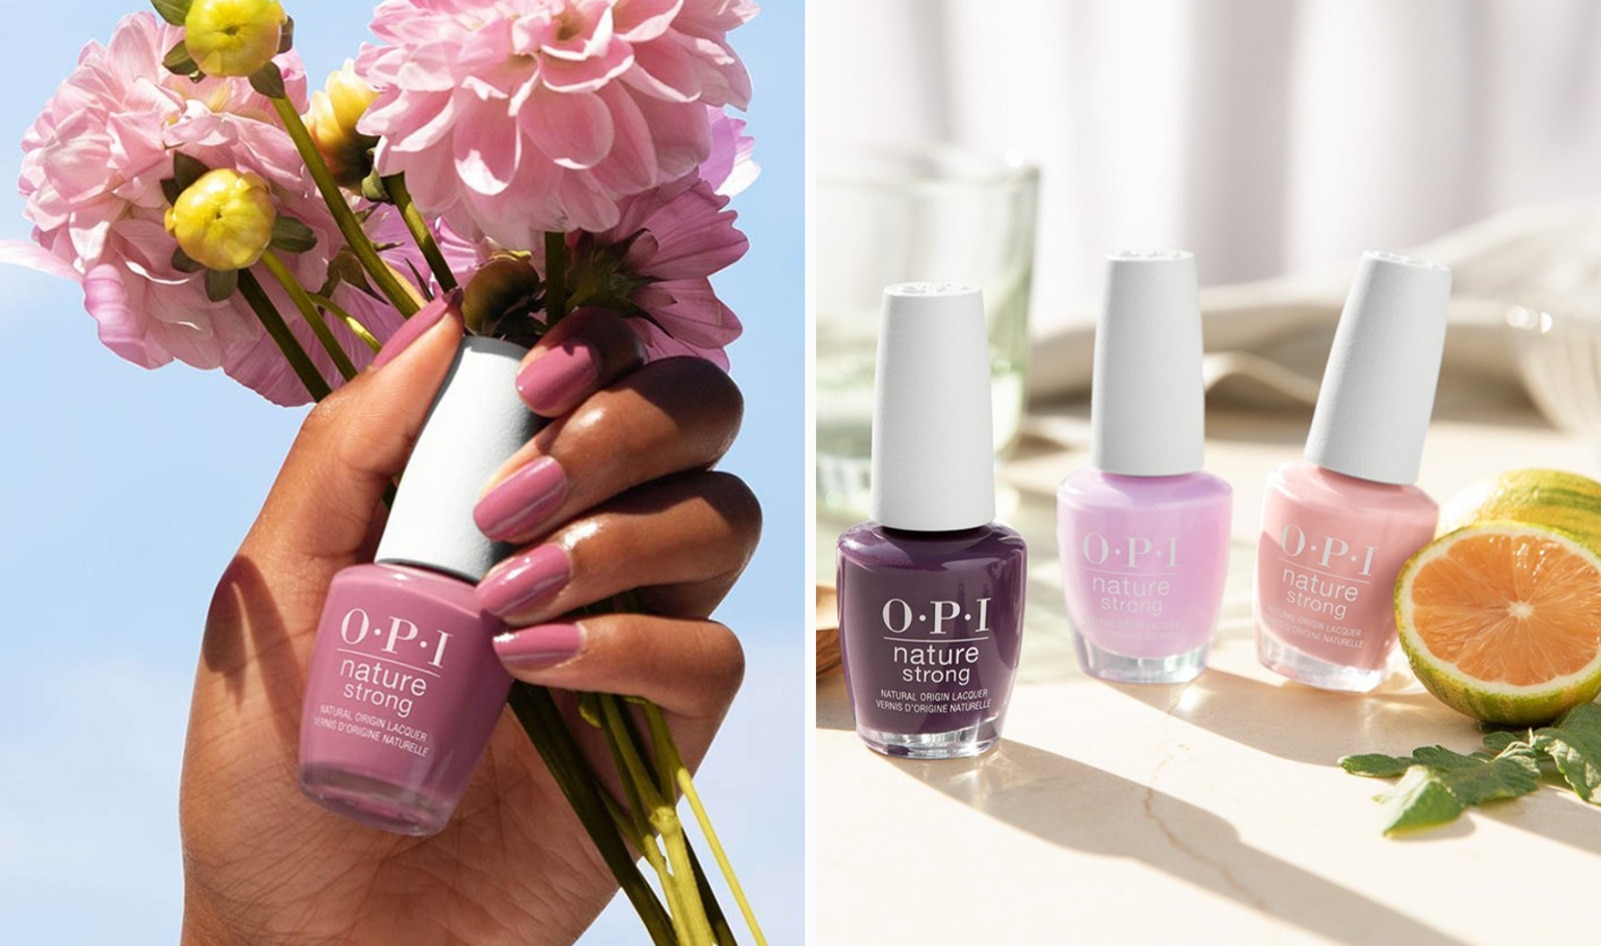 OPI Just Launched Its First Vegan Nail Polish Collection